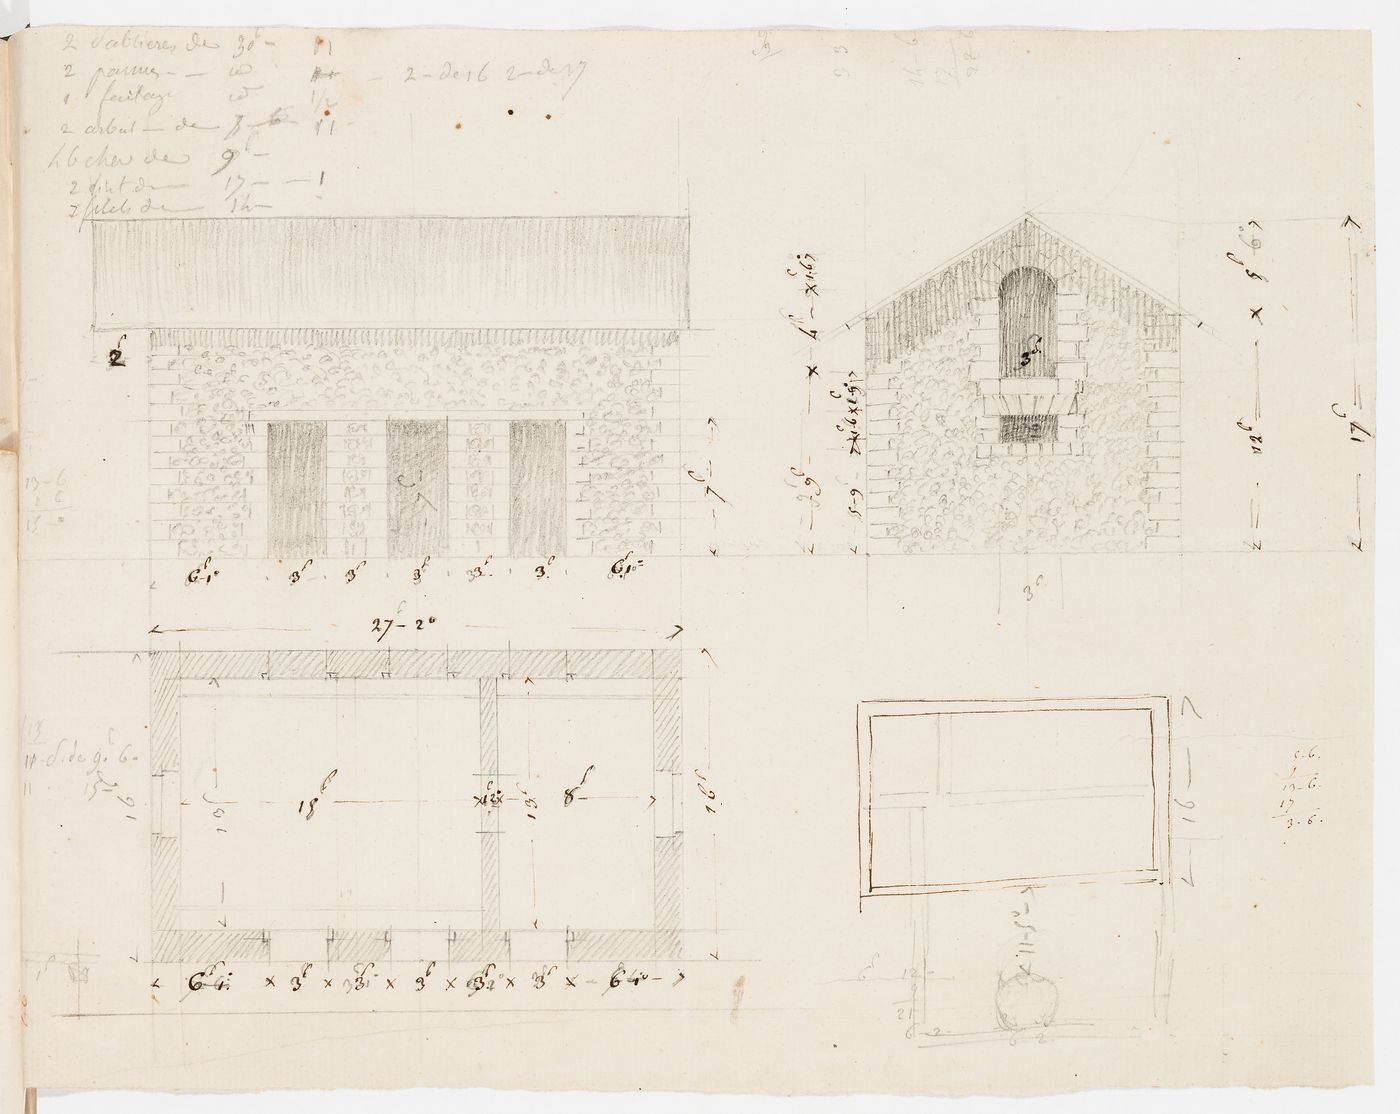 Elevations and plans, probably for a stable and cowshed for Domaine de La Vallée